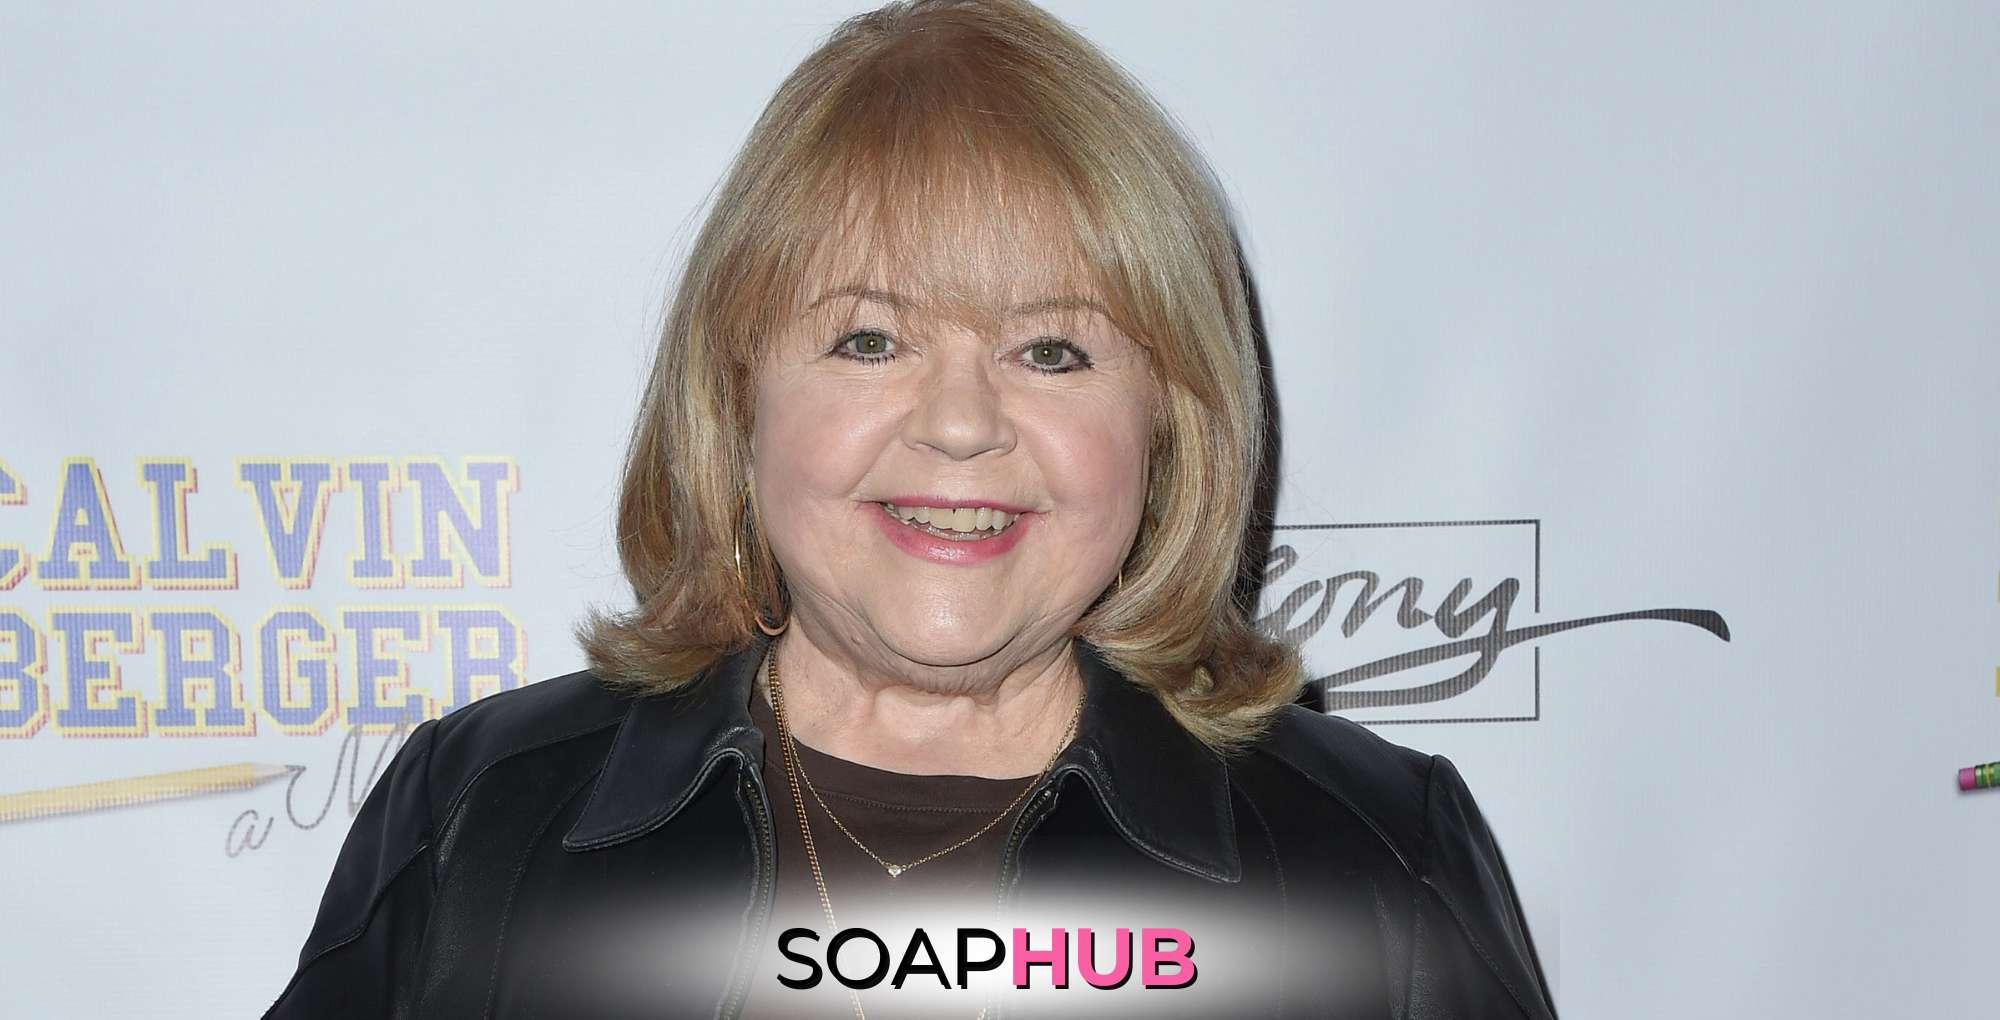 Days of our Lives and Bold and the Beautiful alum Patrika Darbo with the Soap Hub logo across the bottom.